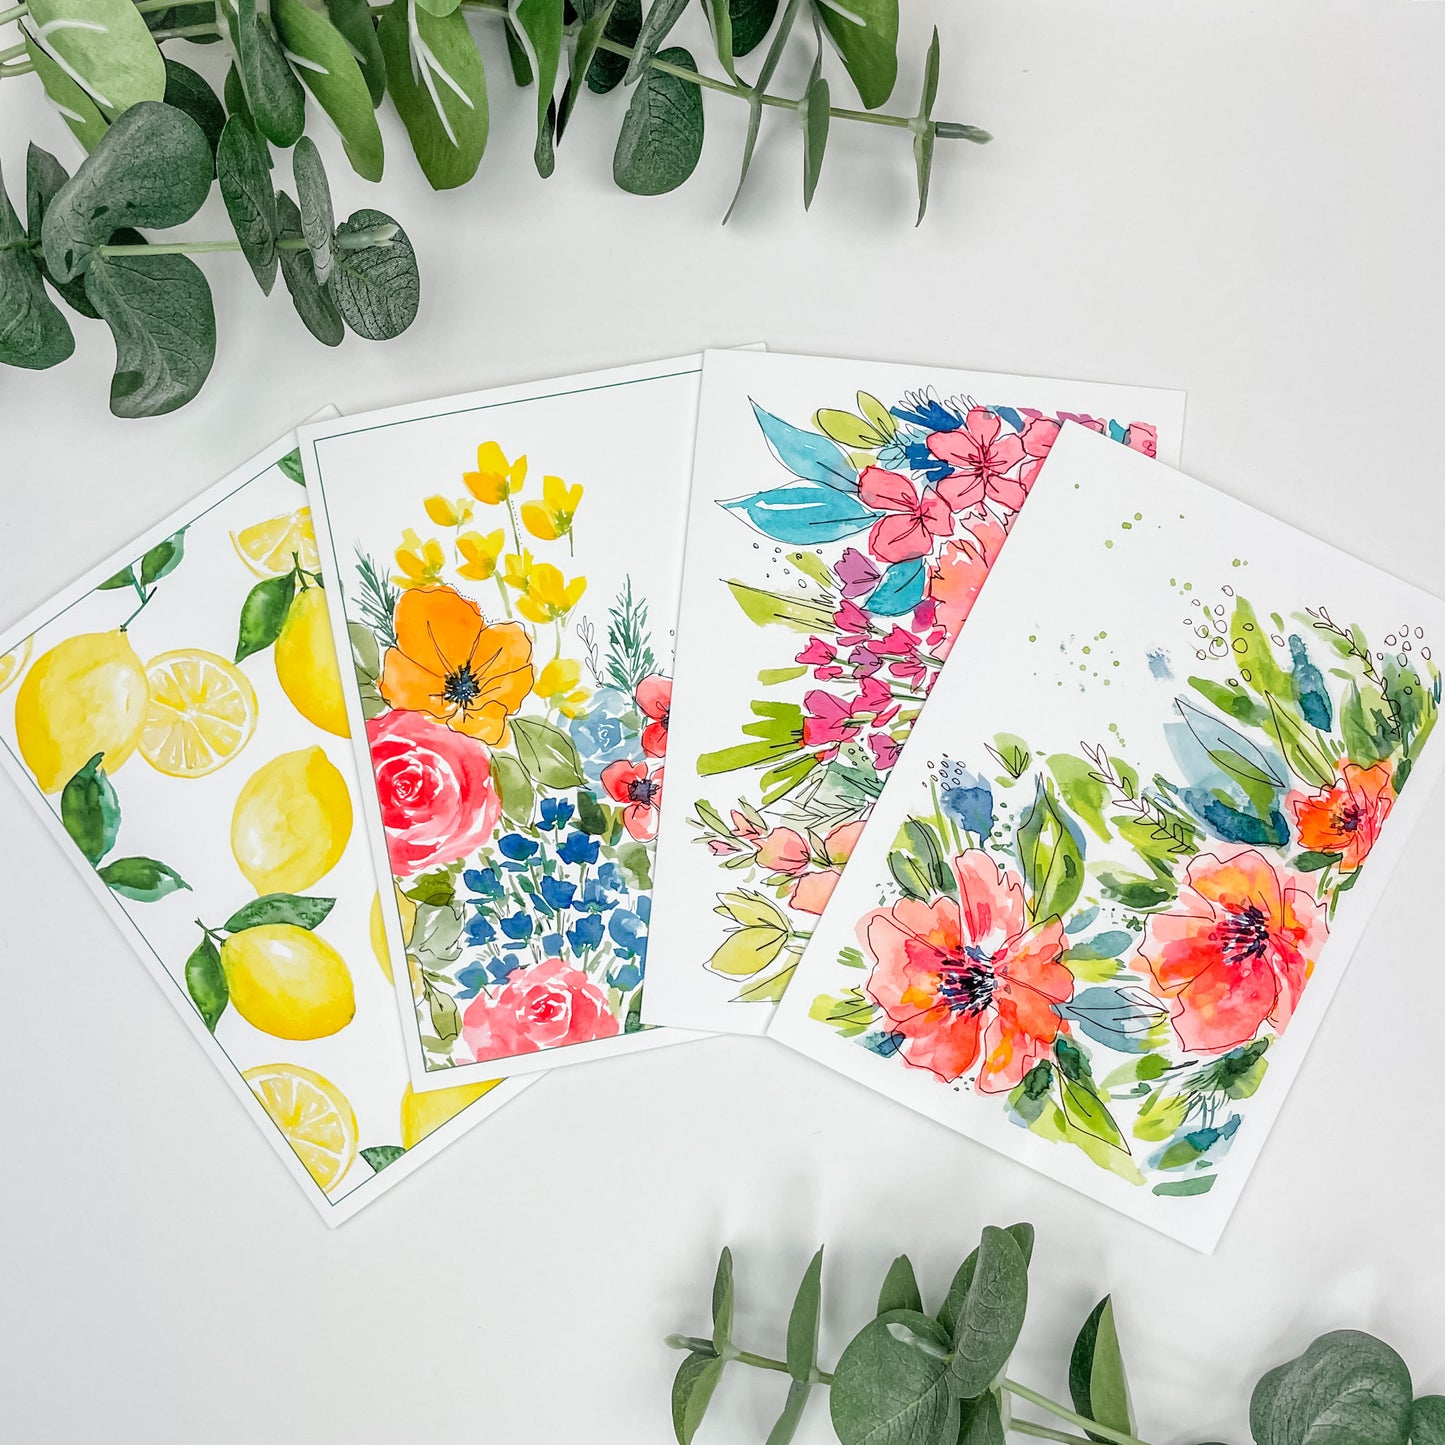 The Bright and Cheerful Collection 5x7" Greeting Cards